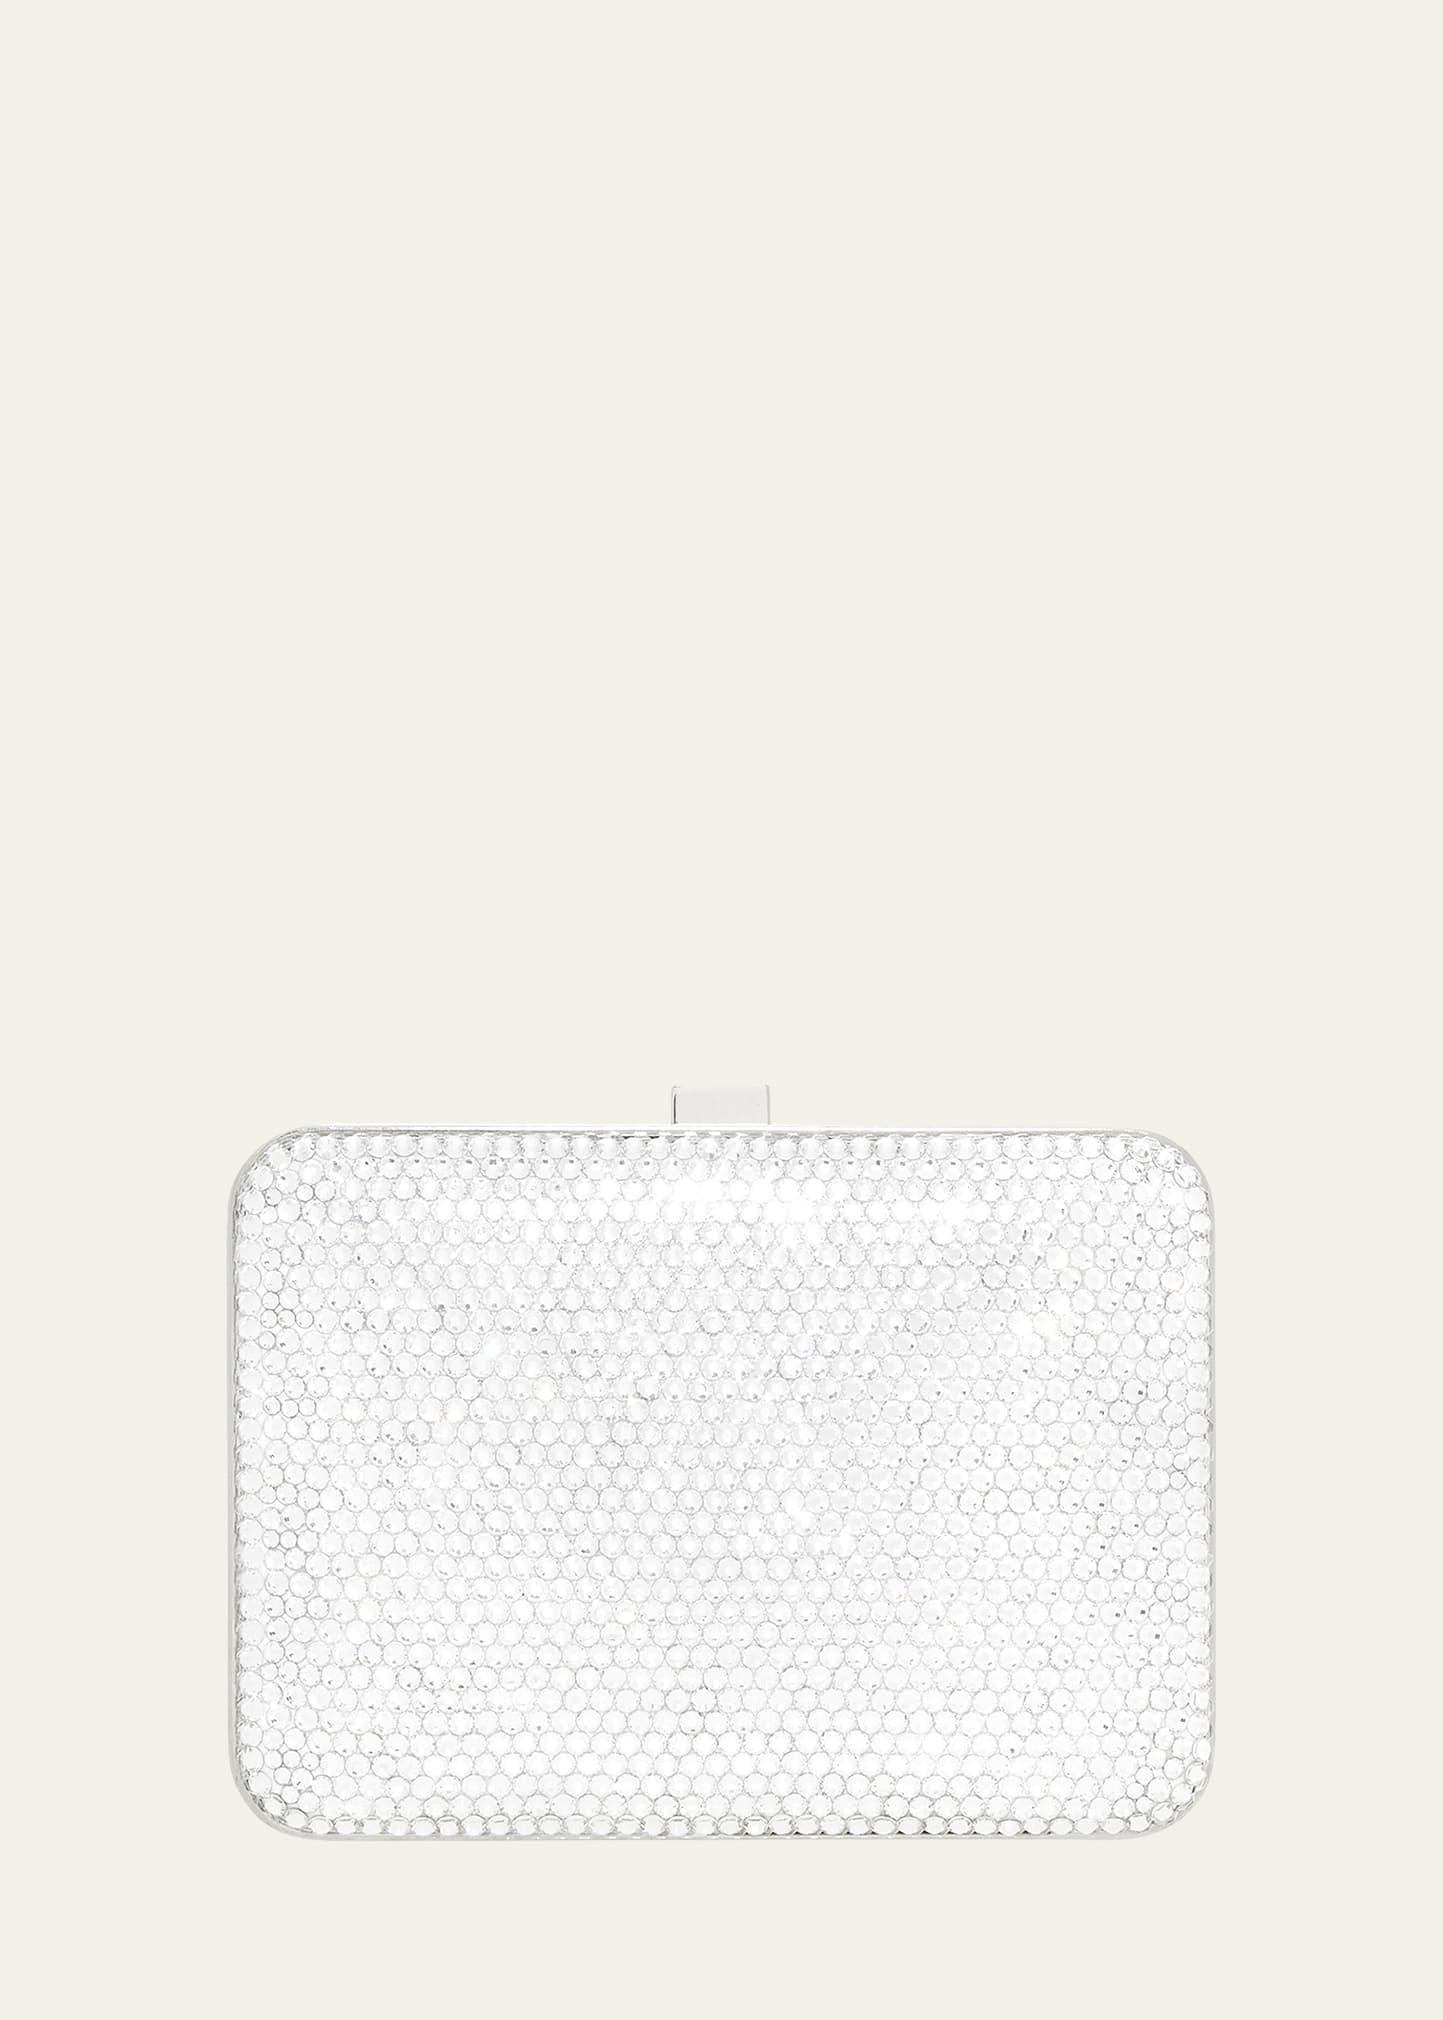 Judith Leiber Couture Mini Crystal Rectangle Clutch Bag